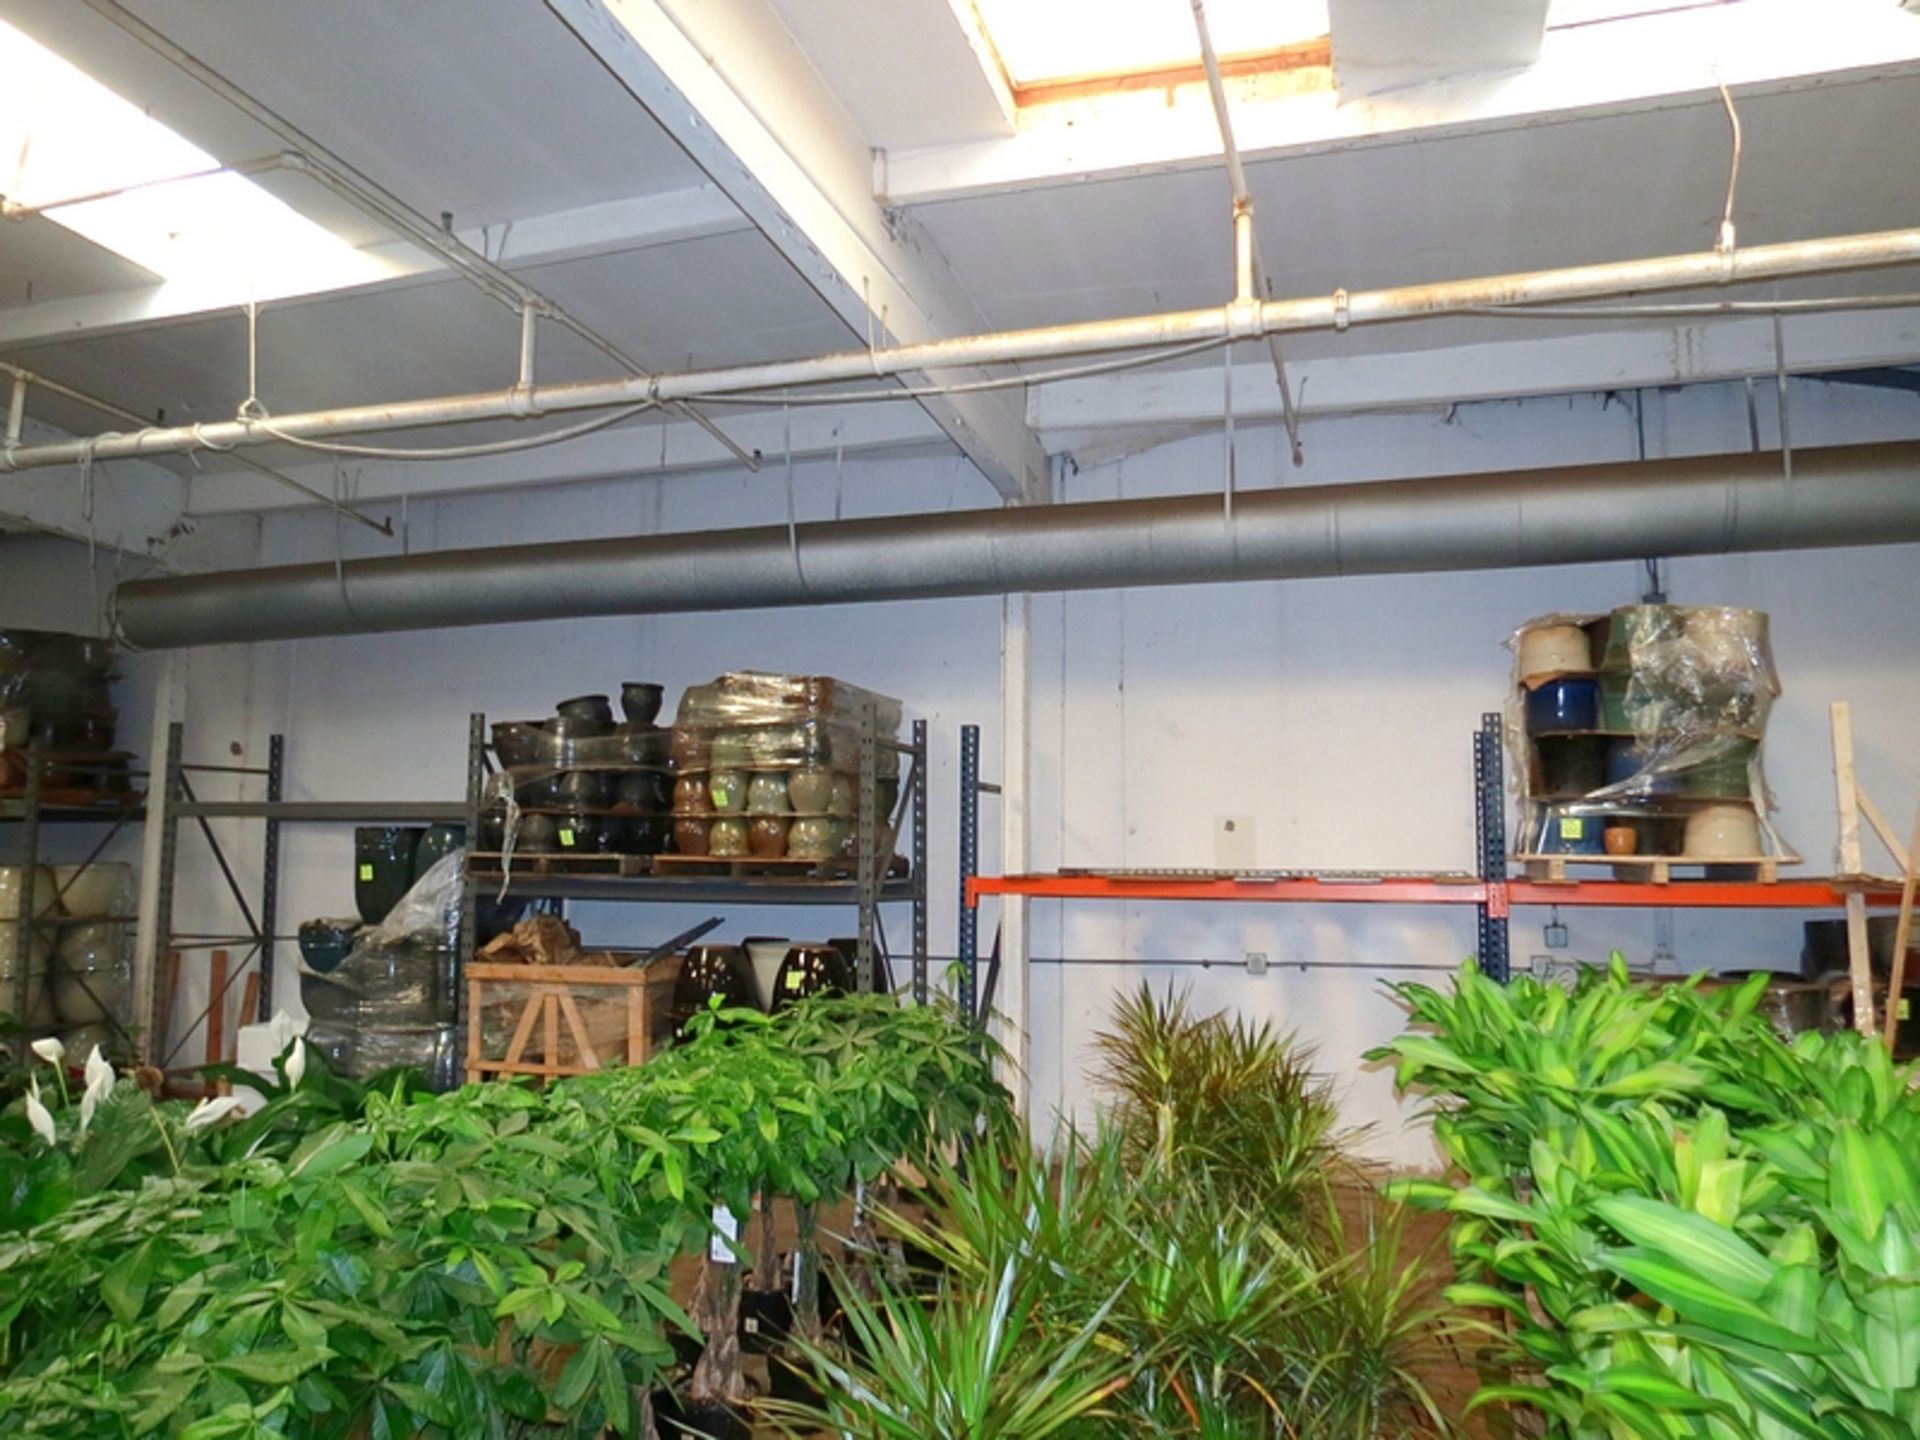 2 Section of Plant Racking - Image 2 of 2